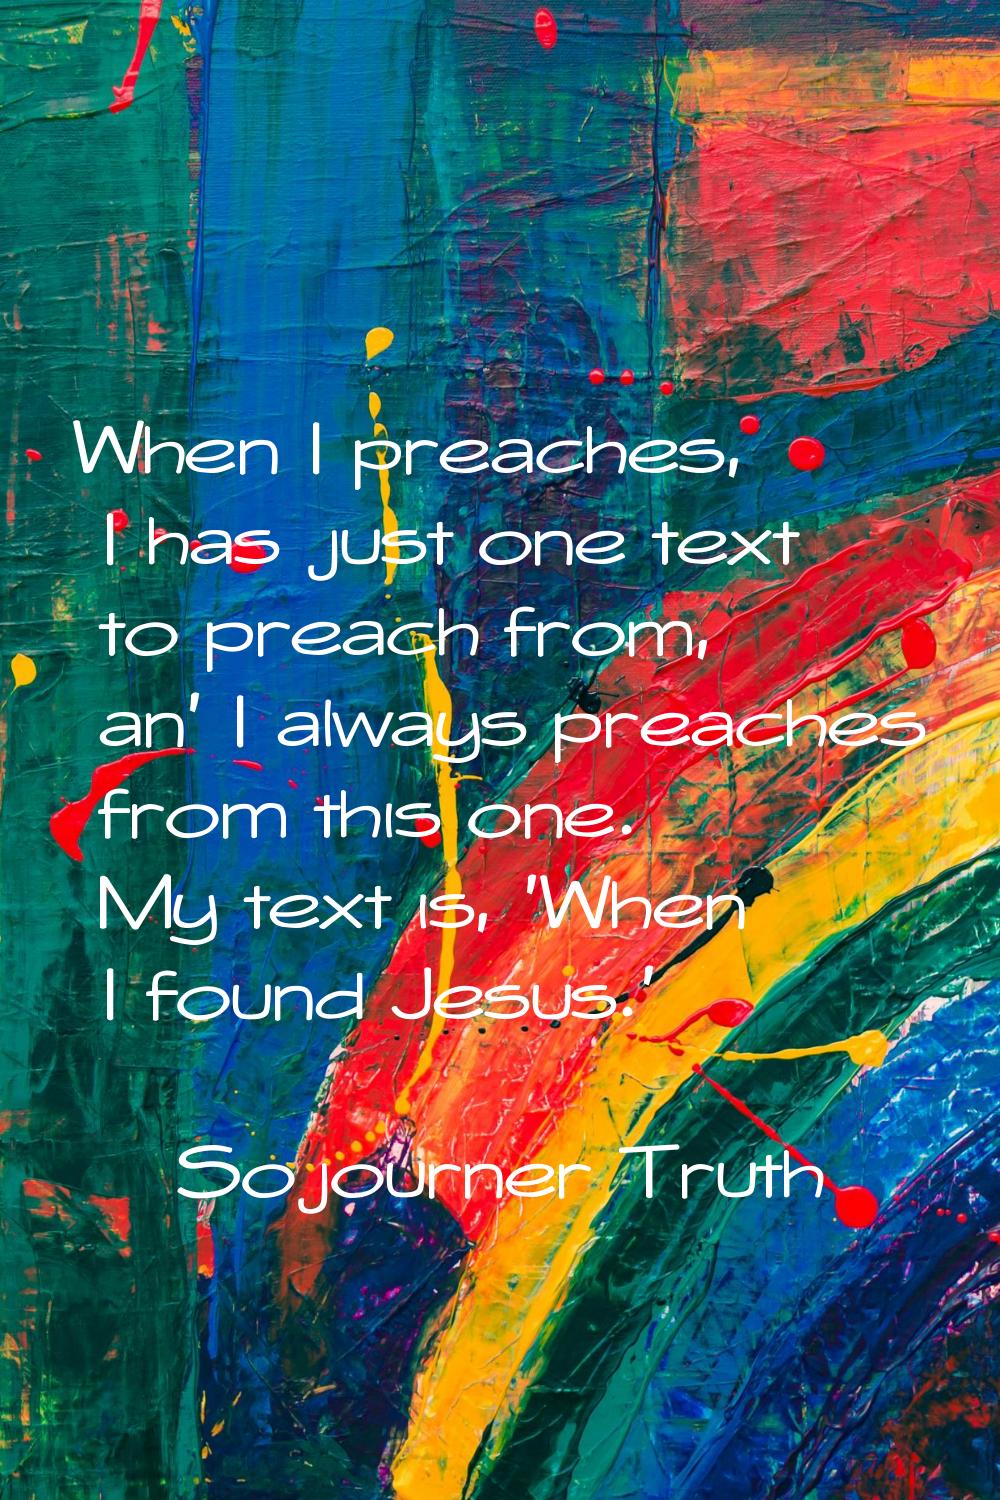 When I preaches, I has just one text to preach from, an' I always preaches from this one. My text i